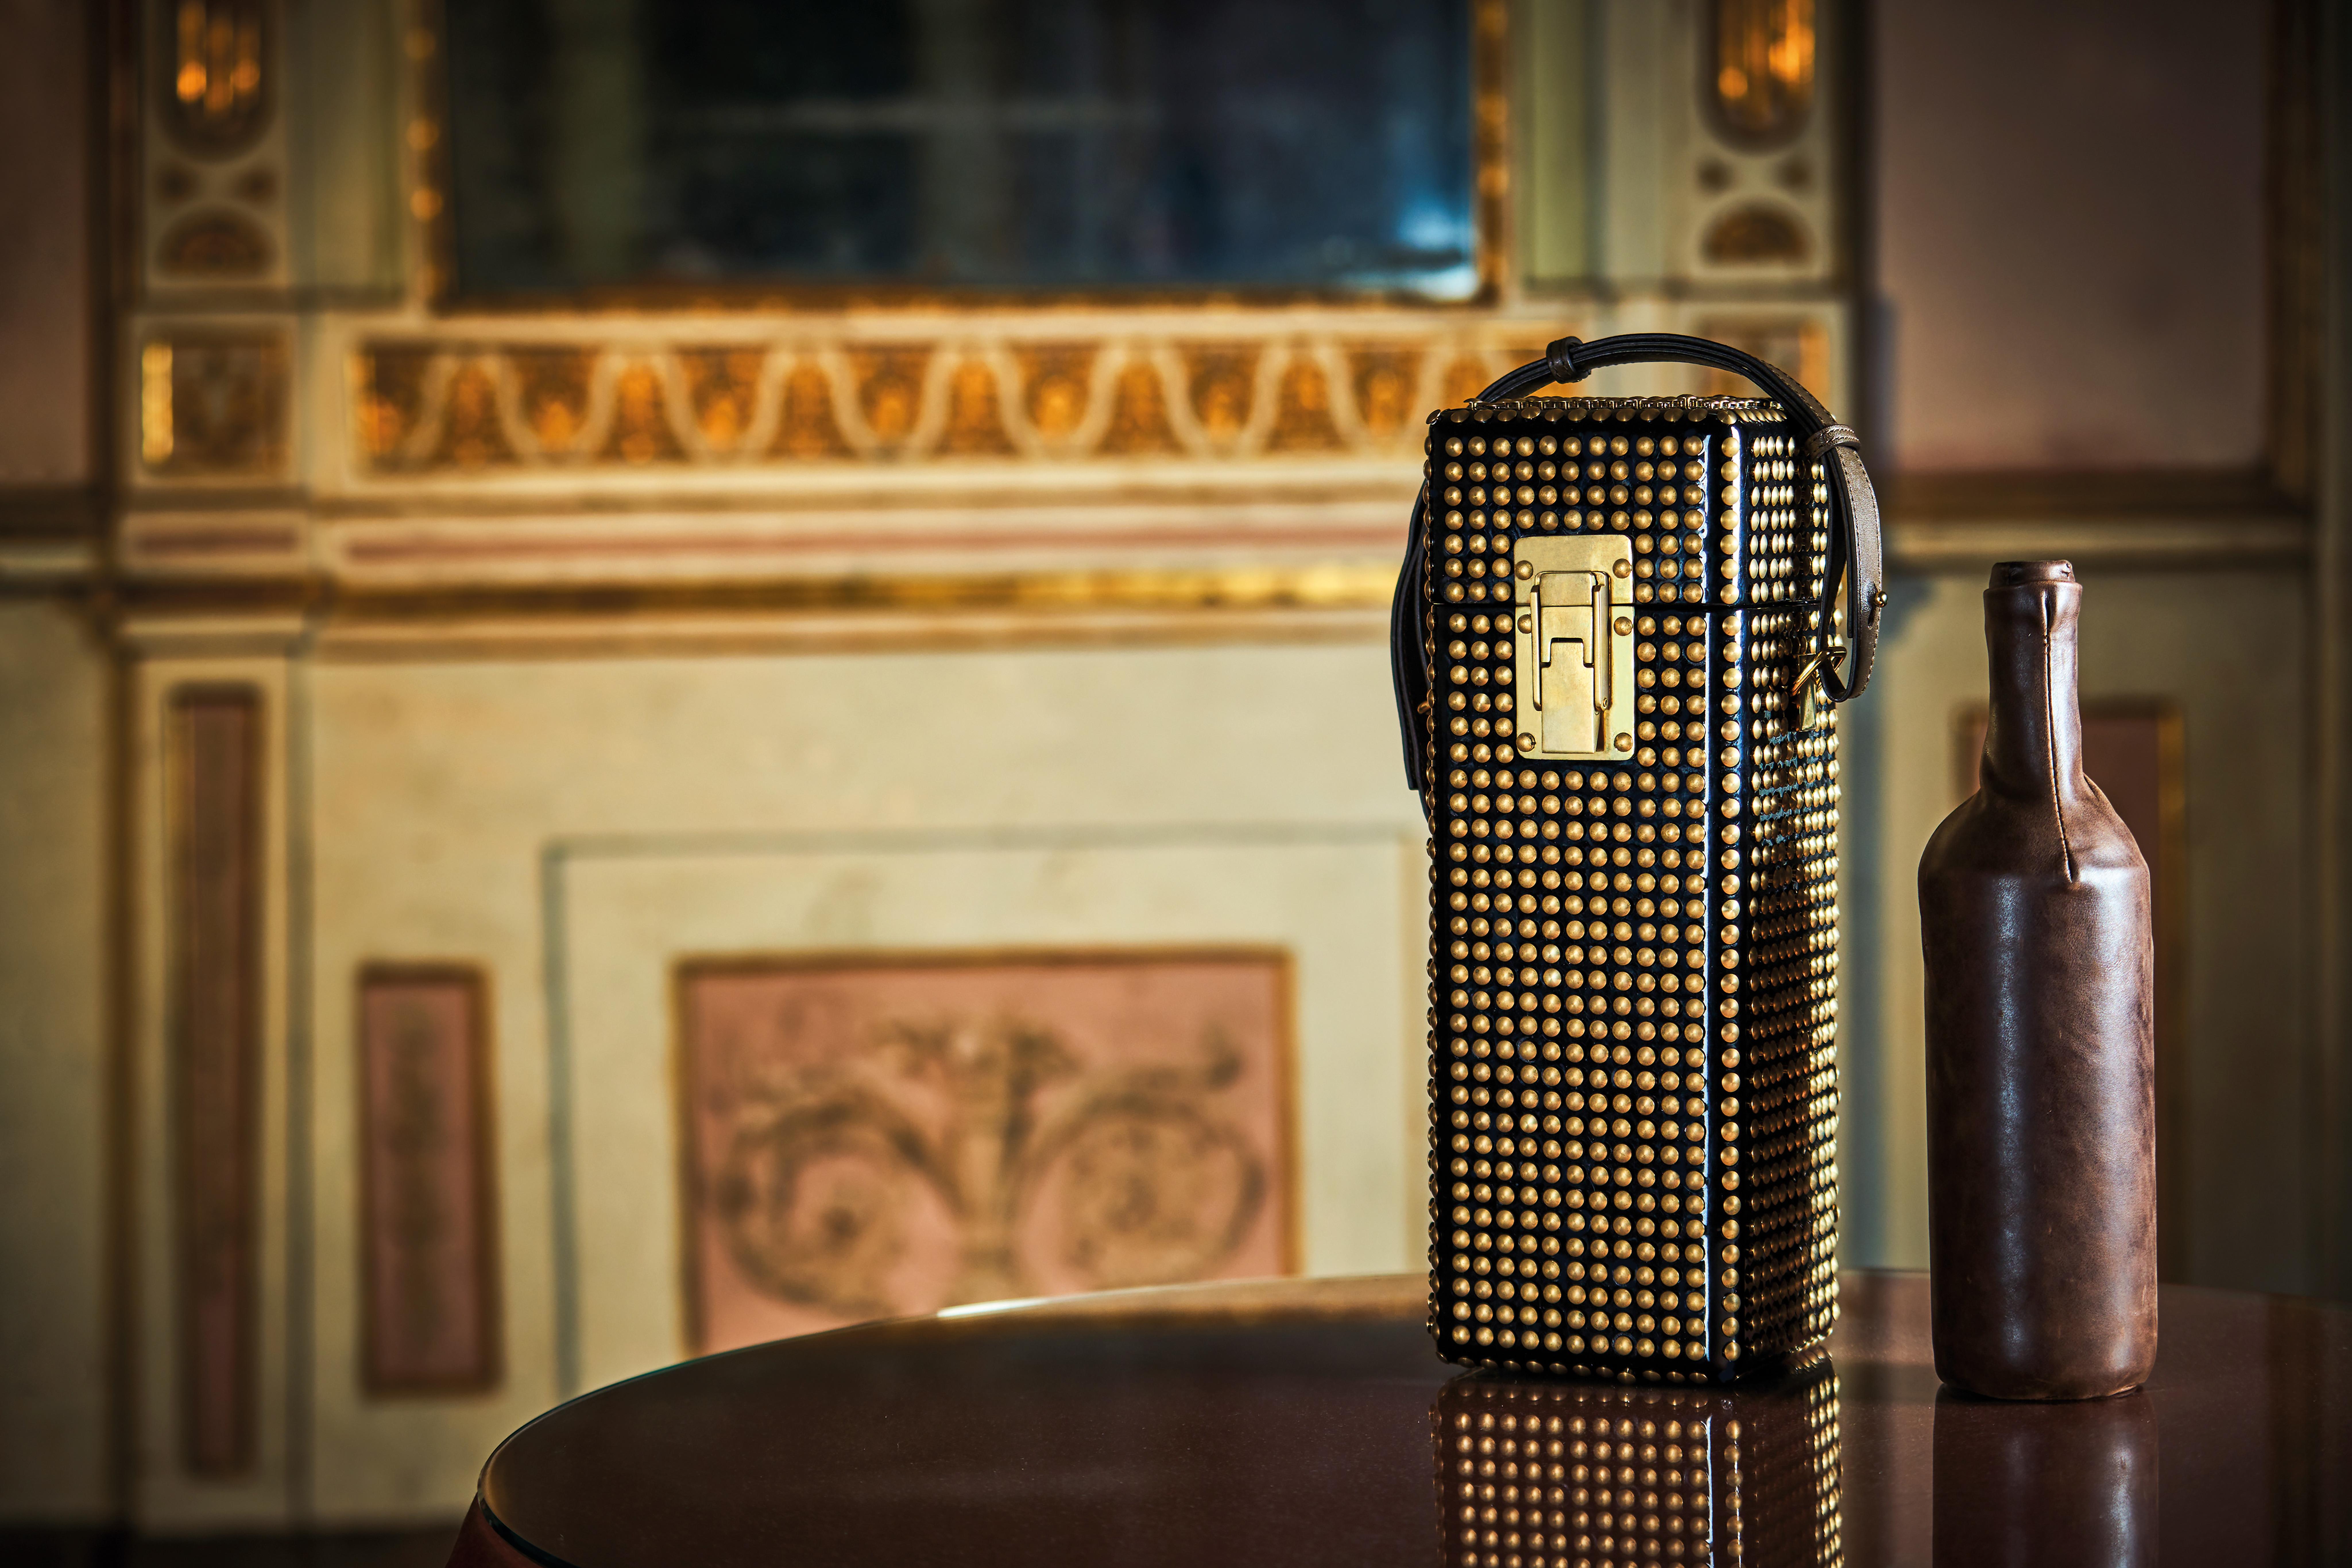 Montecarlo is the perfect casket for the most precious bottle of wine, a unique handcrafted piece in which the workmanship of Made in Italy stands out. An extremely elegant, designer accessory in which the luster of lacquered black is enhanced by